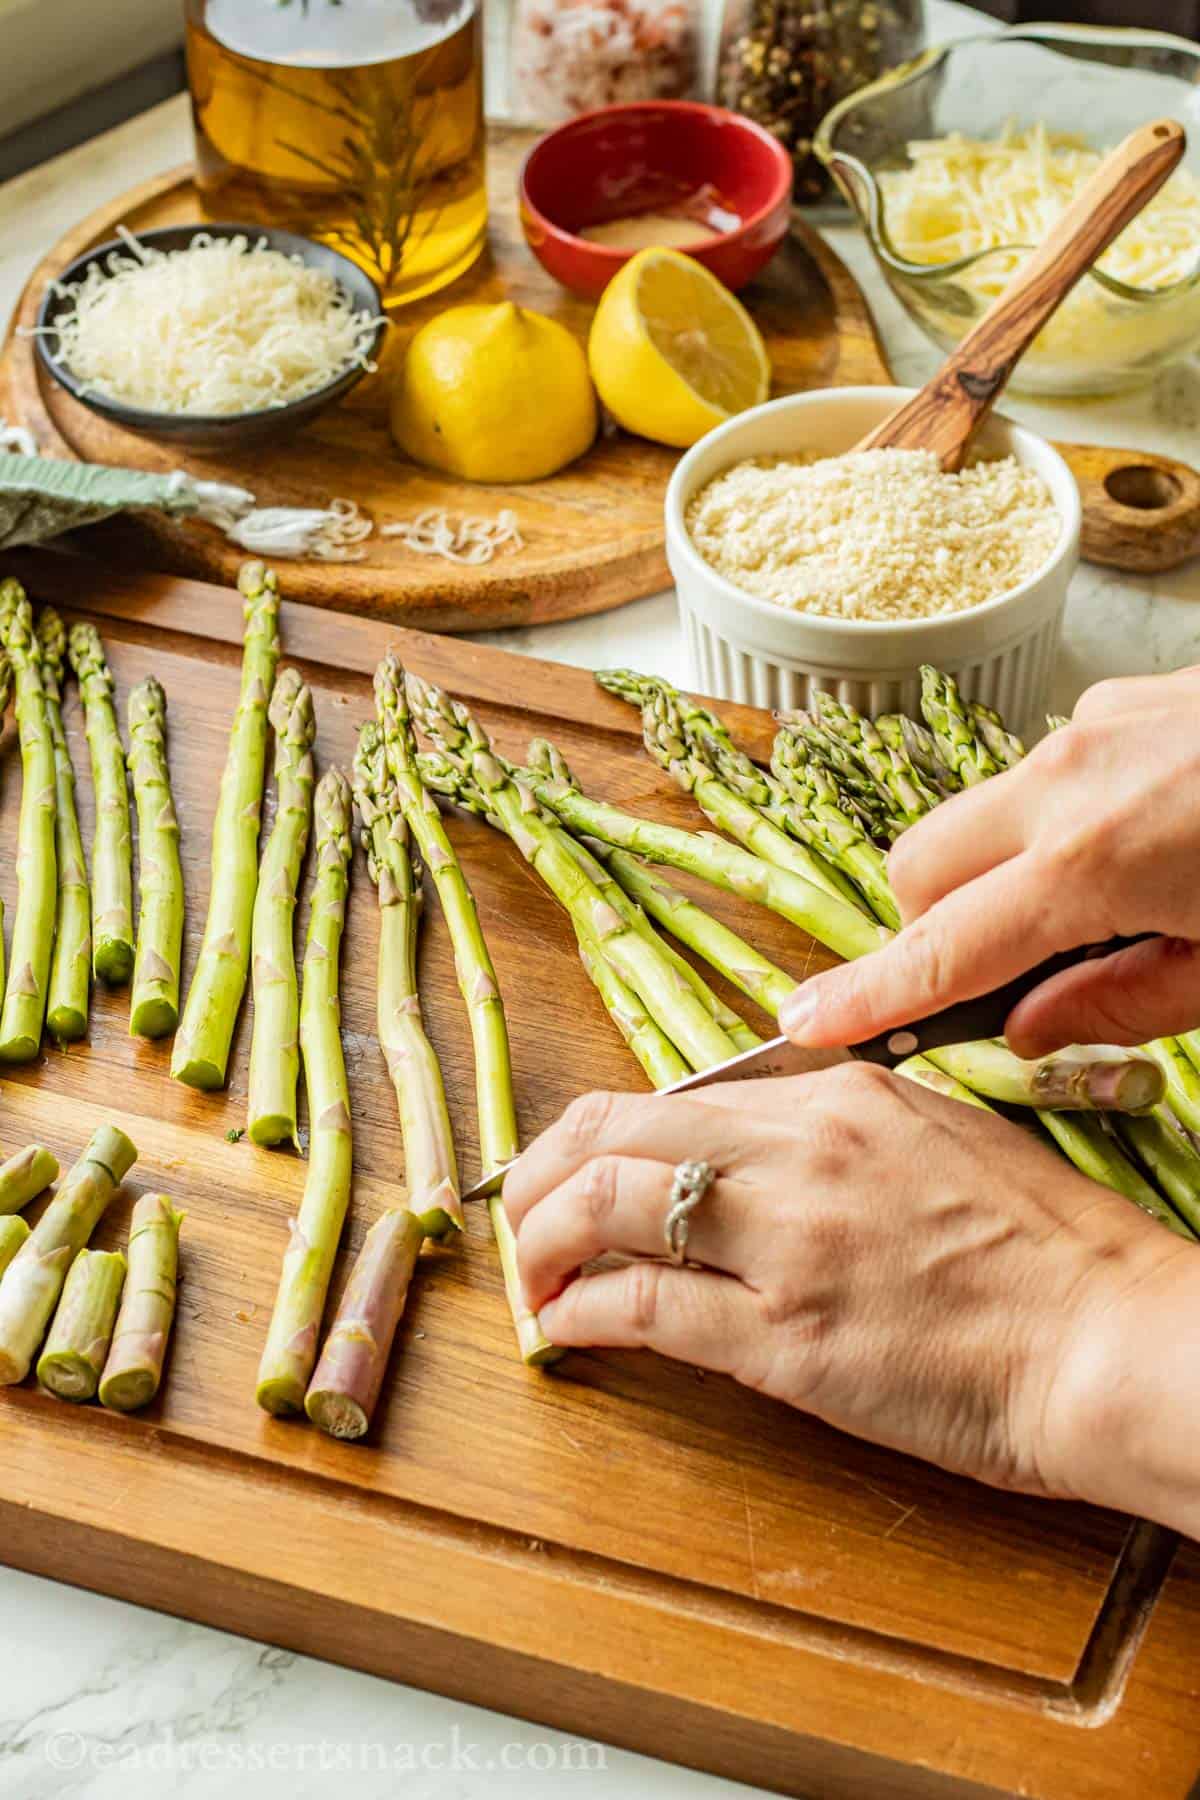 Hands and knife chopping fresh asparagus on wood cutting board.